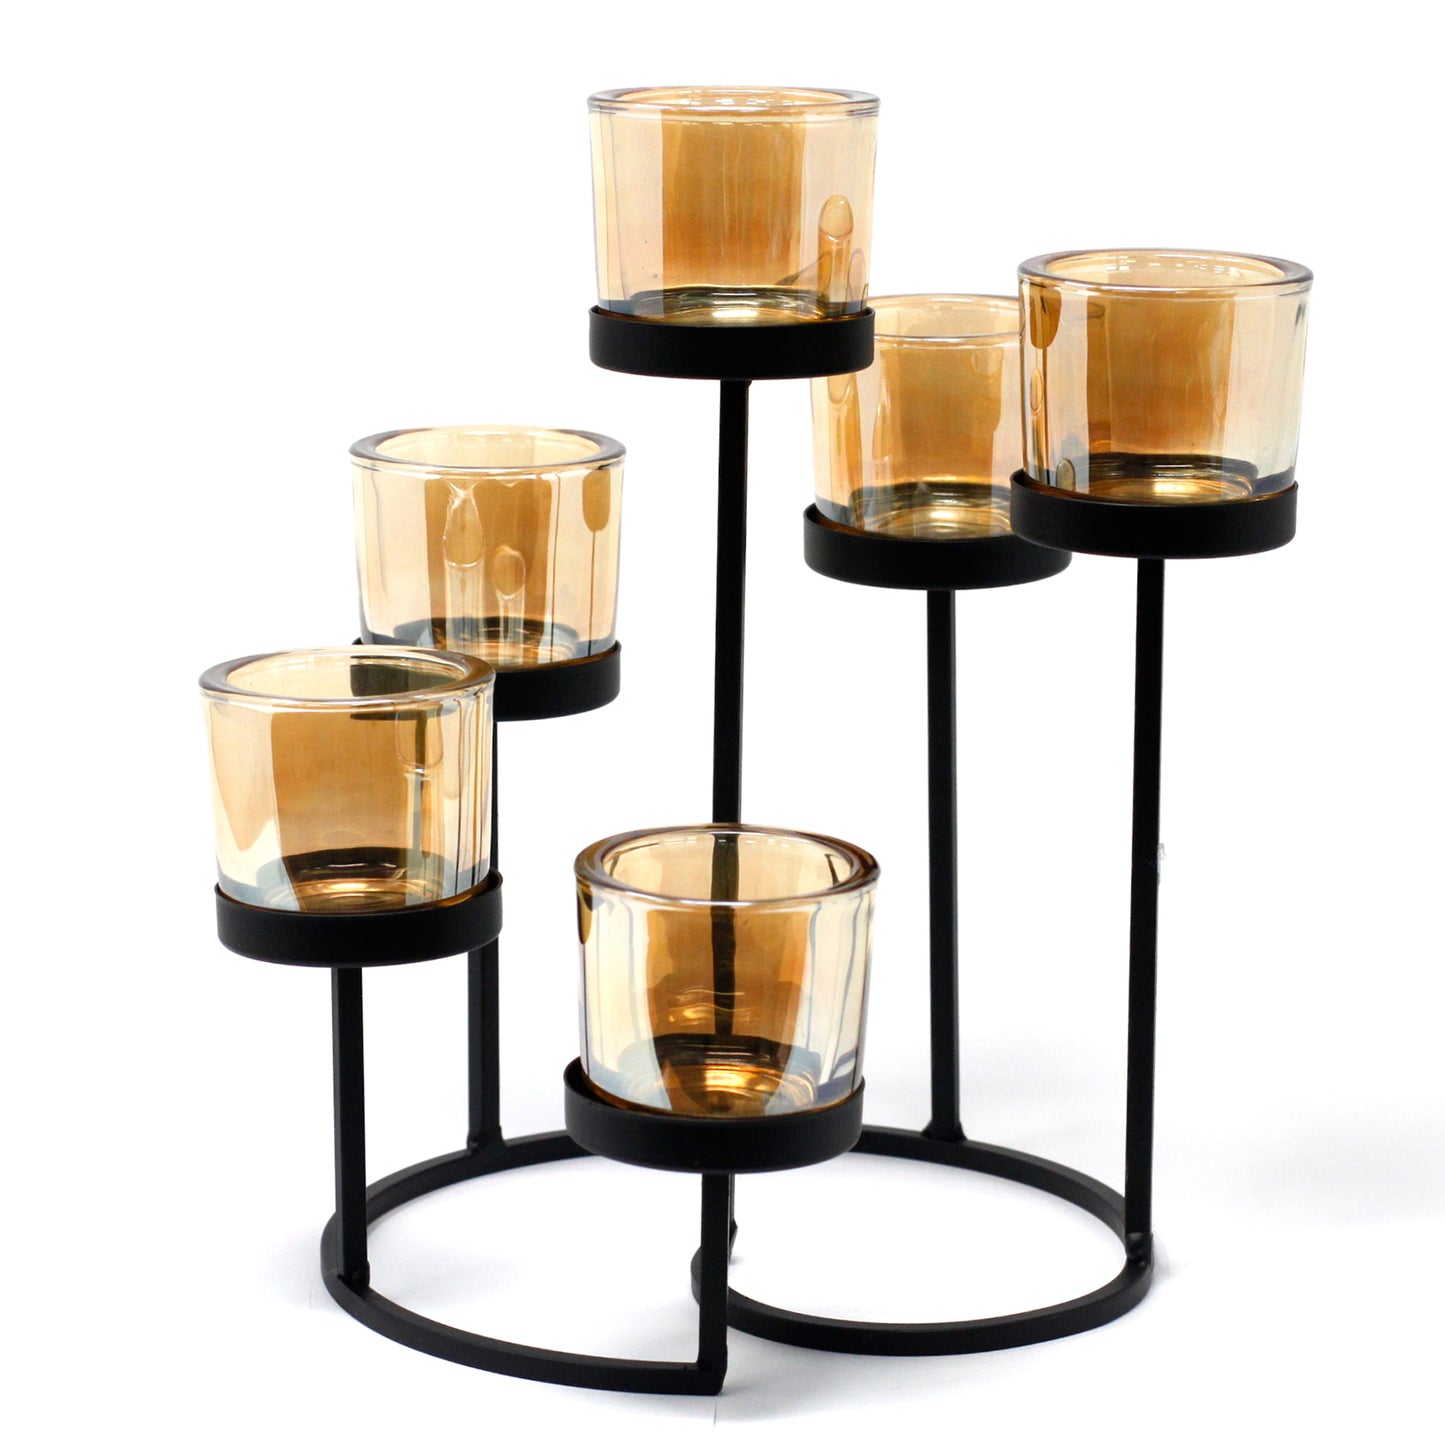 Centrepiece Iron Votive Candle Holder - 6 Cup Circular Tree